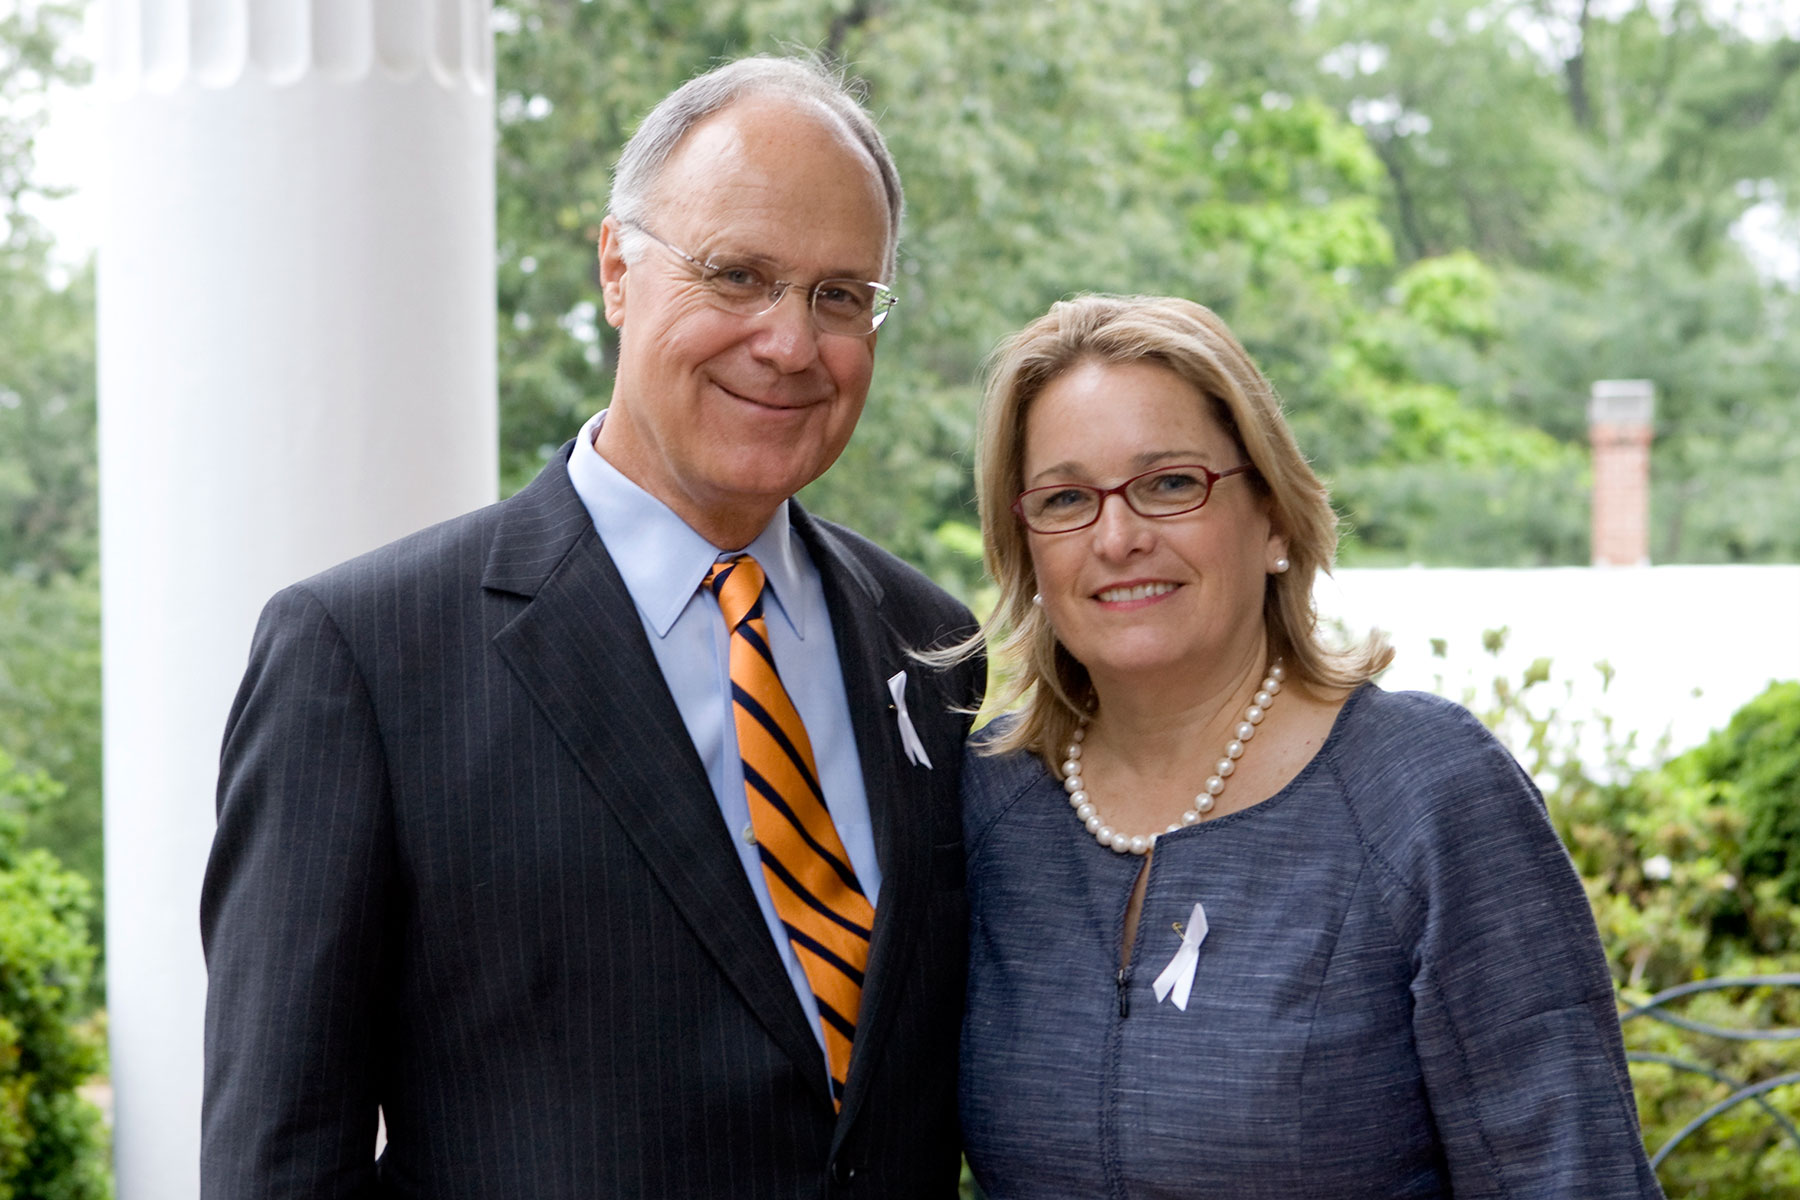 John T. Casteen III and Betsy Casteen stand next to each other smiling at the camera